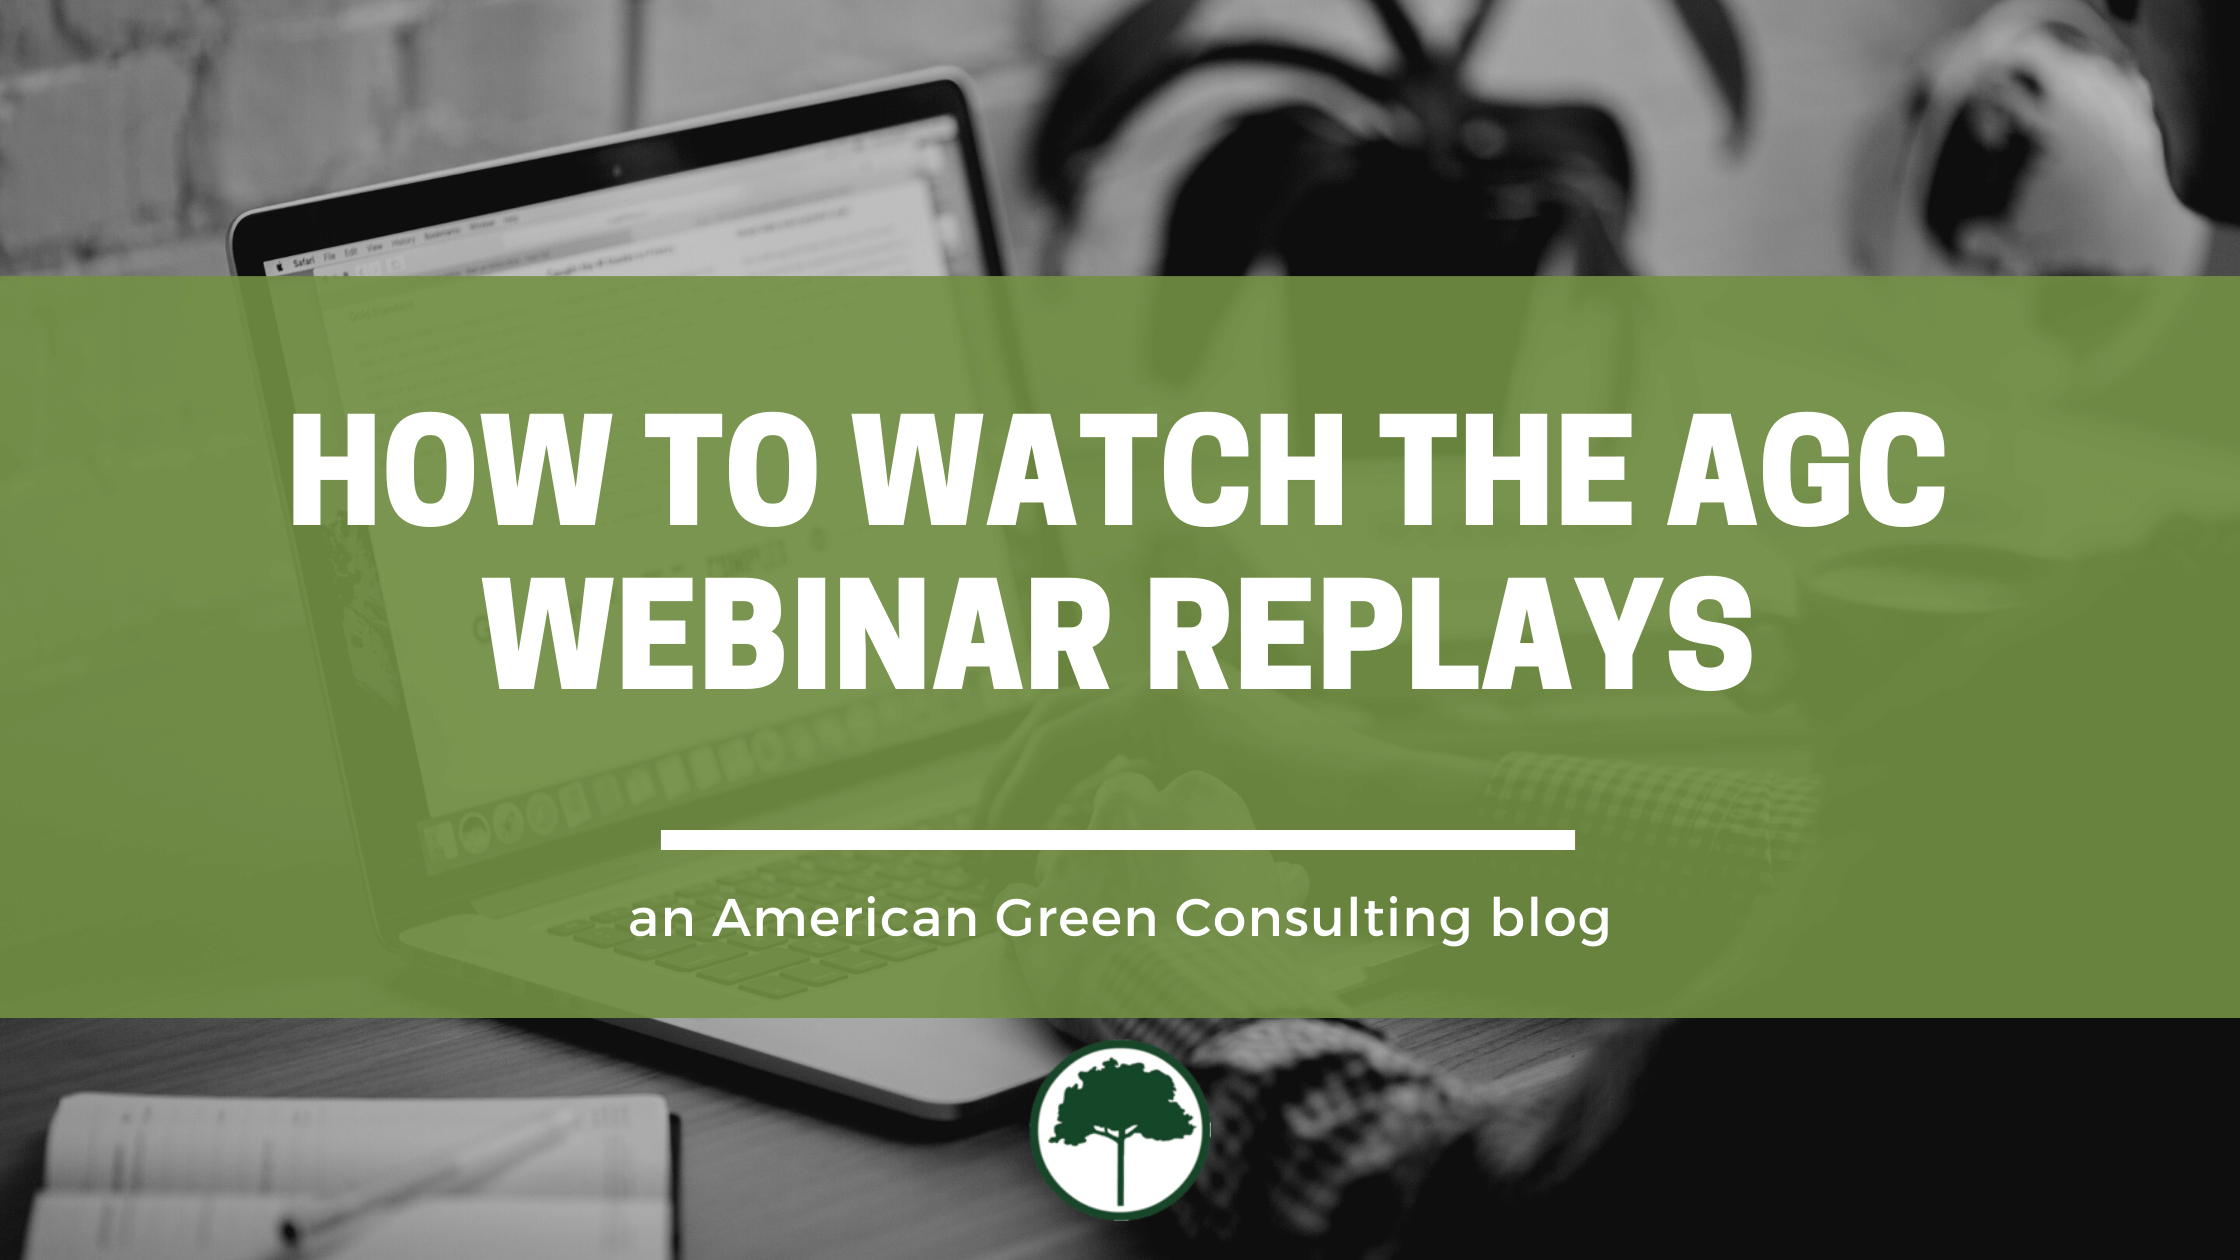 Have you missed the American Green Consulting webinars? Here’s how to watch the replays…